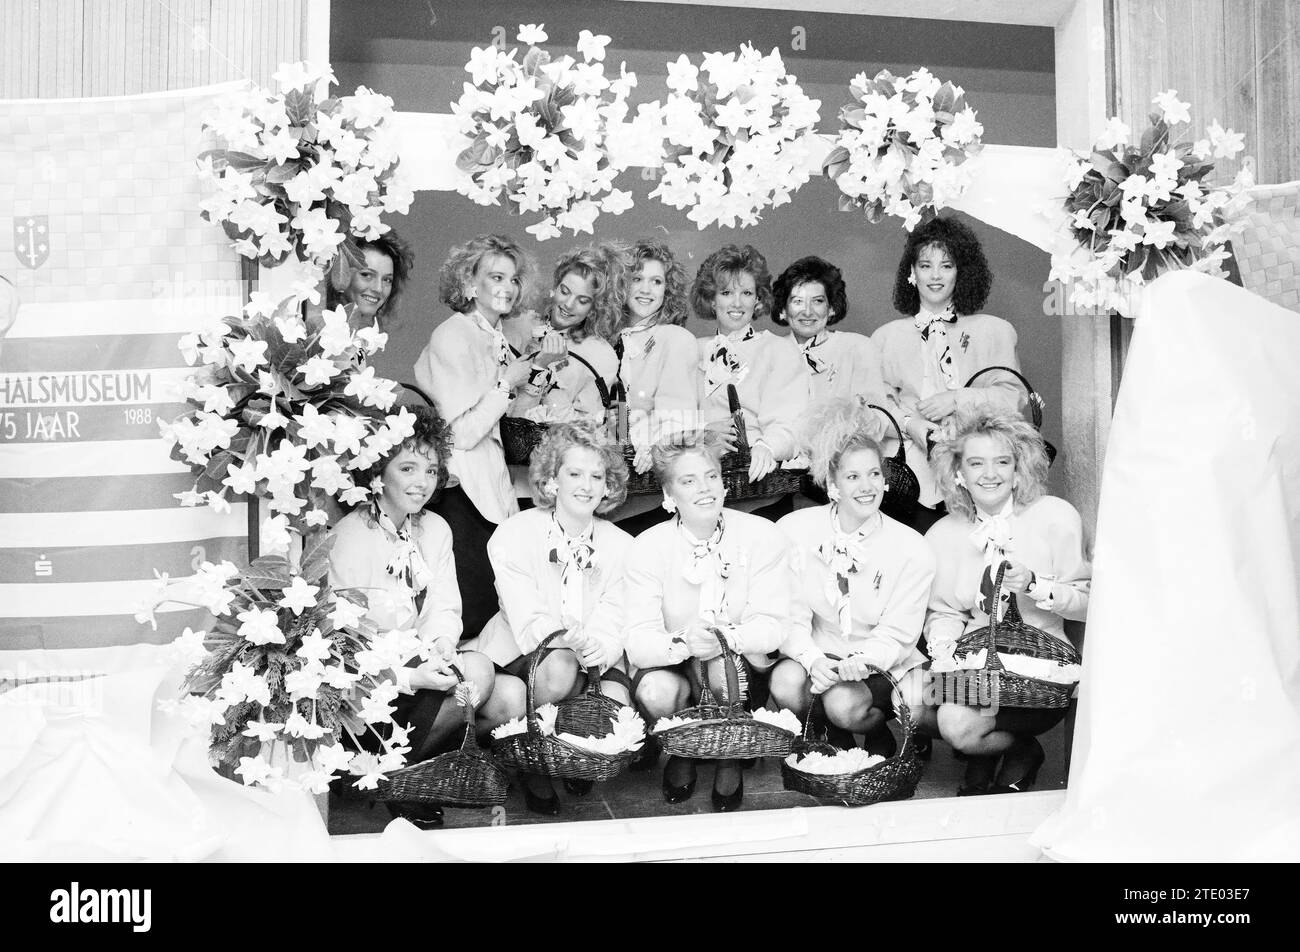 Presentation of flower girls at the Frans Hals museum, dressed by Frans Molenaar who is also in the group photo in the courtyard., Flowers and flower girls, Haarlem, Groot Heiligland 62, The Netherlands, 23-03-1988, Whizgle News from the Past, Tailored for the Future. Explore historical narratives, Dutch The Netherlands agency image with a modern perspective, bridging the gap between yesterday's events and tomorrow's insights. A timeless journey shaping the stories that shape our future. Stock Photo